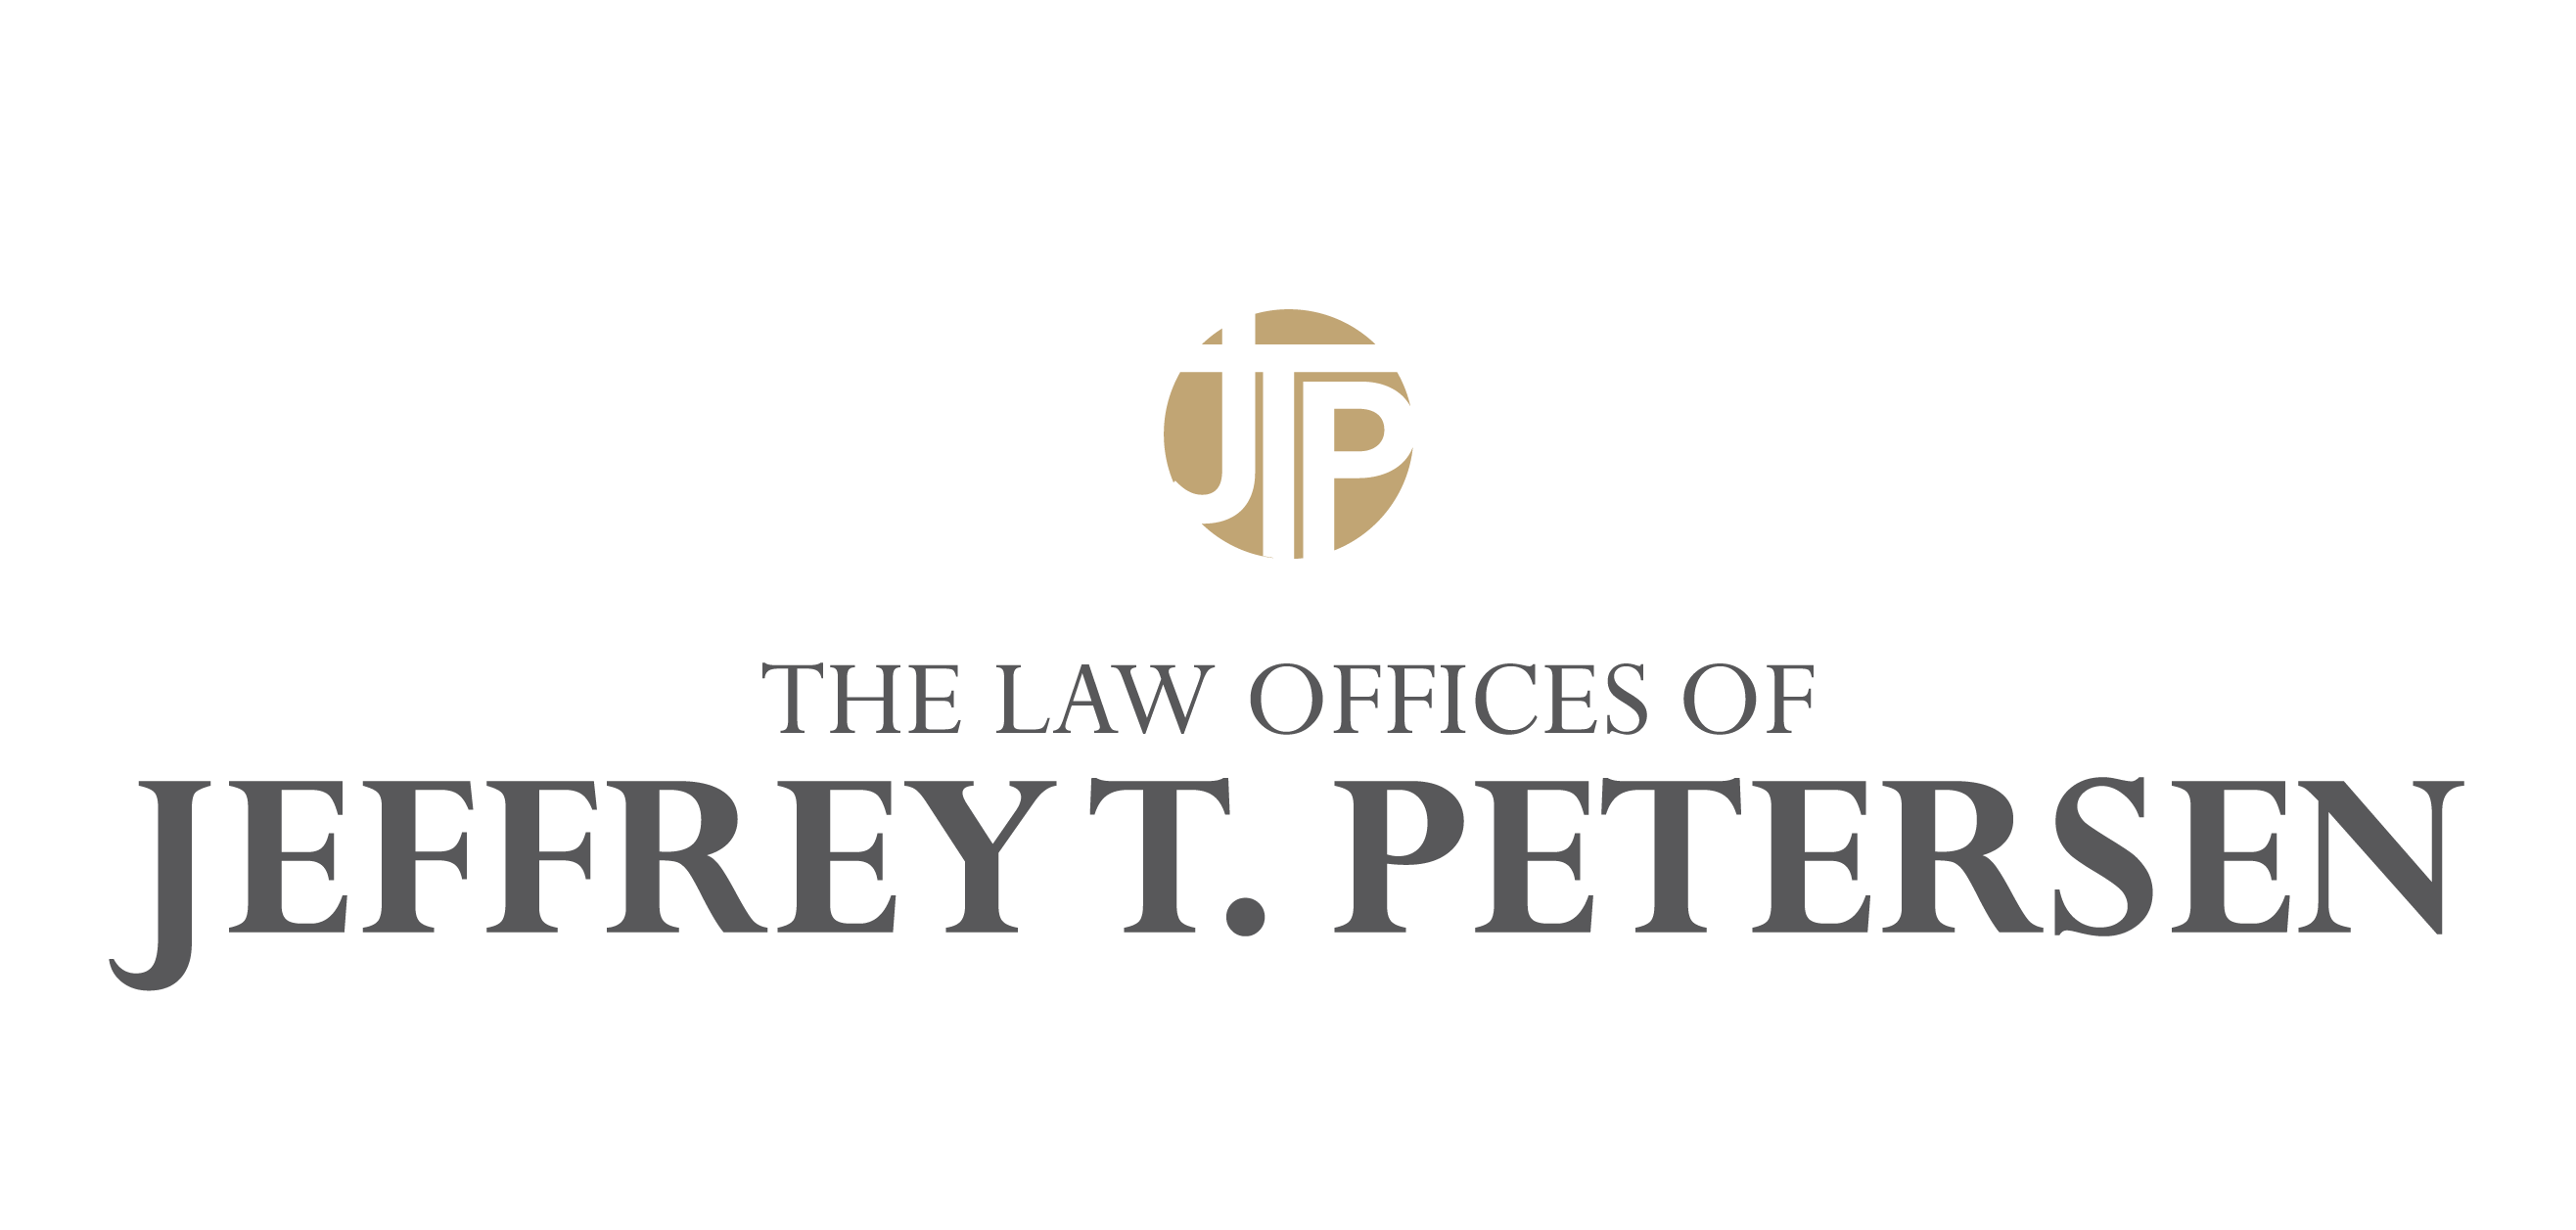 The Law Offices of Jeff Peterson